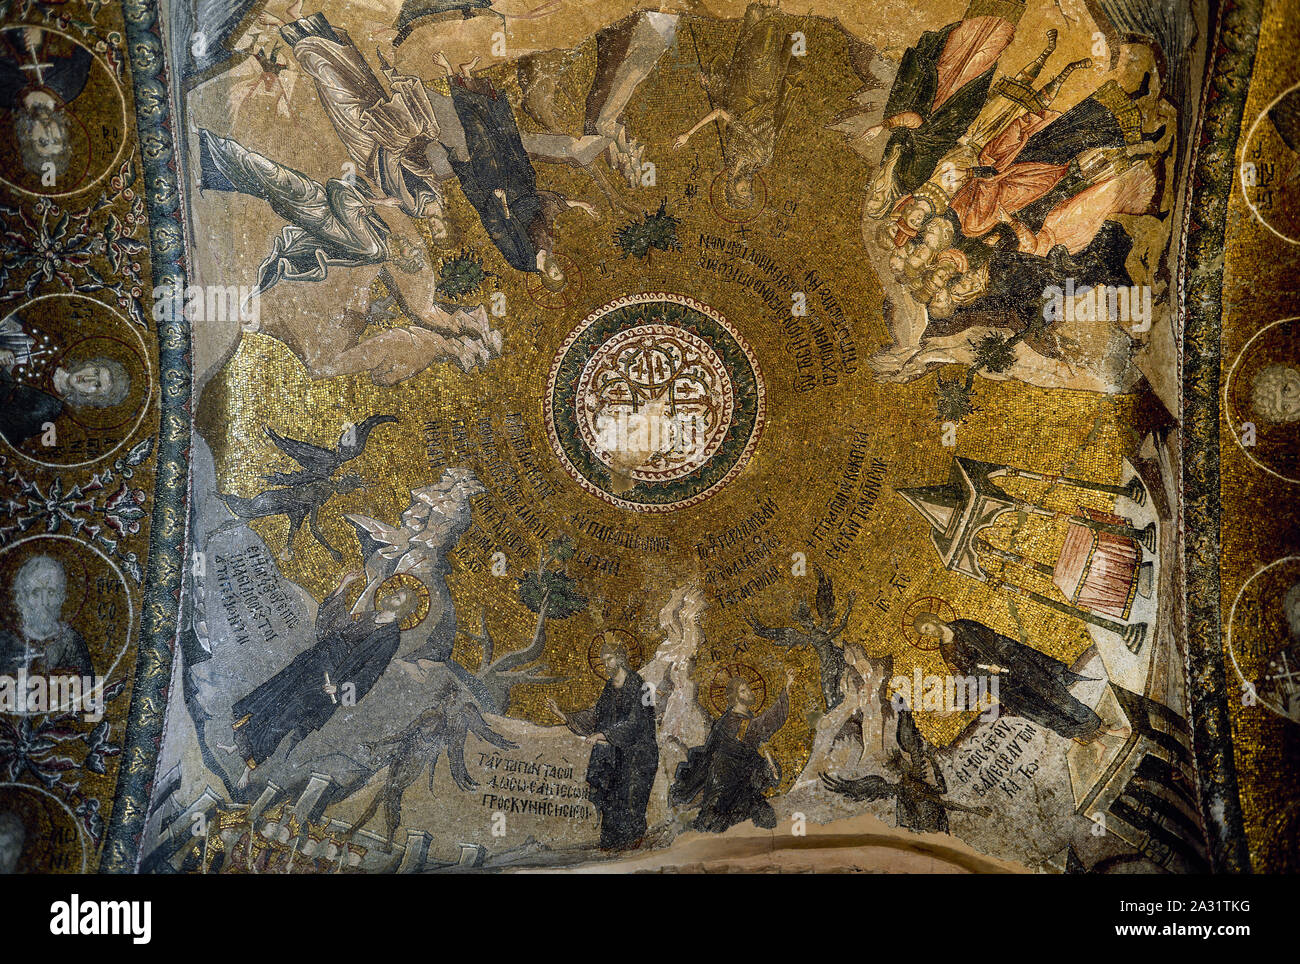 Chora Church. Ceiling mosaics depicting Jesus' Baptism and the Temptation of Christ. They represent four episodes of Christ being confronted by the Devil. Istanbul, Turkey. Stock Photo